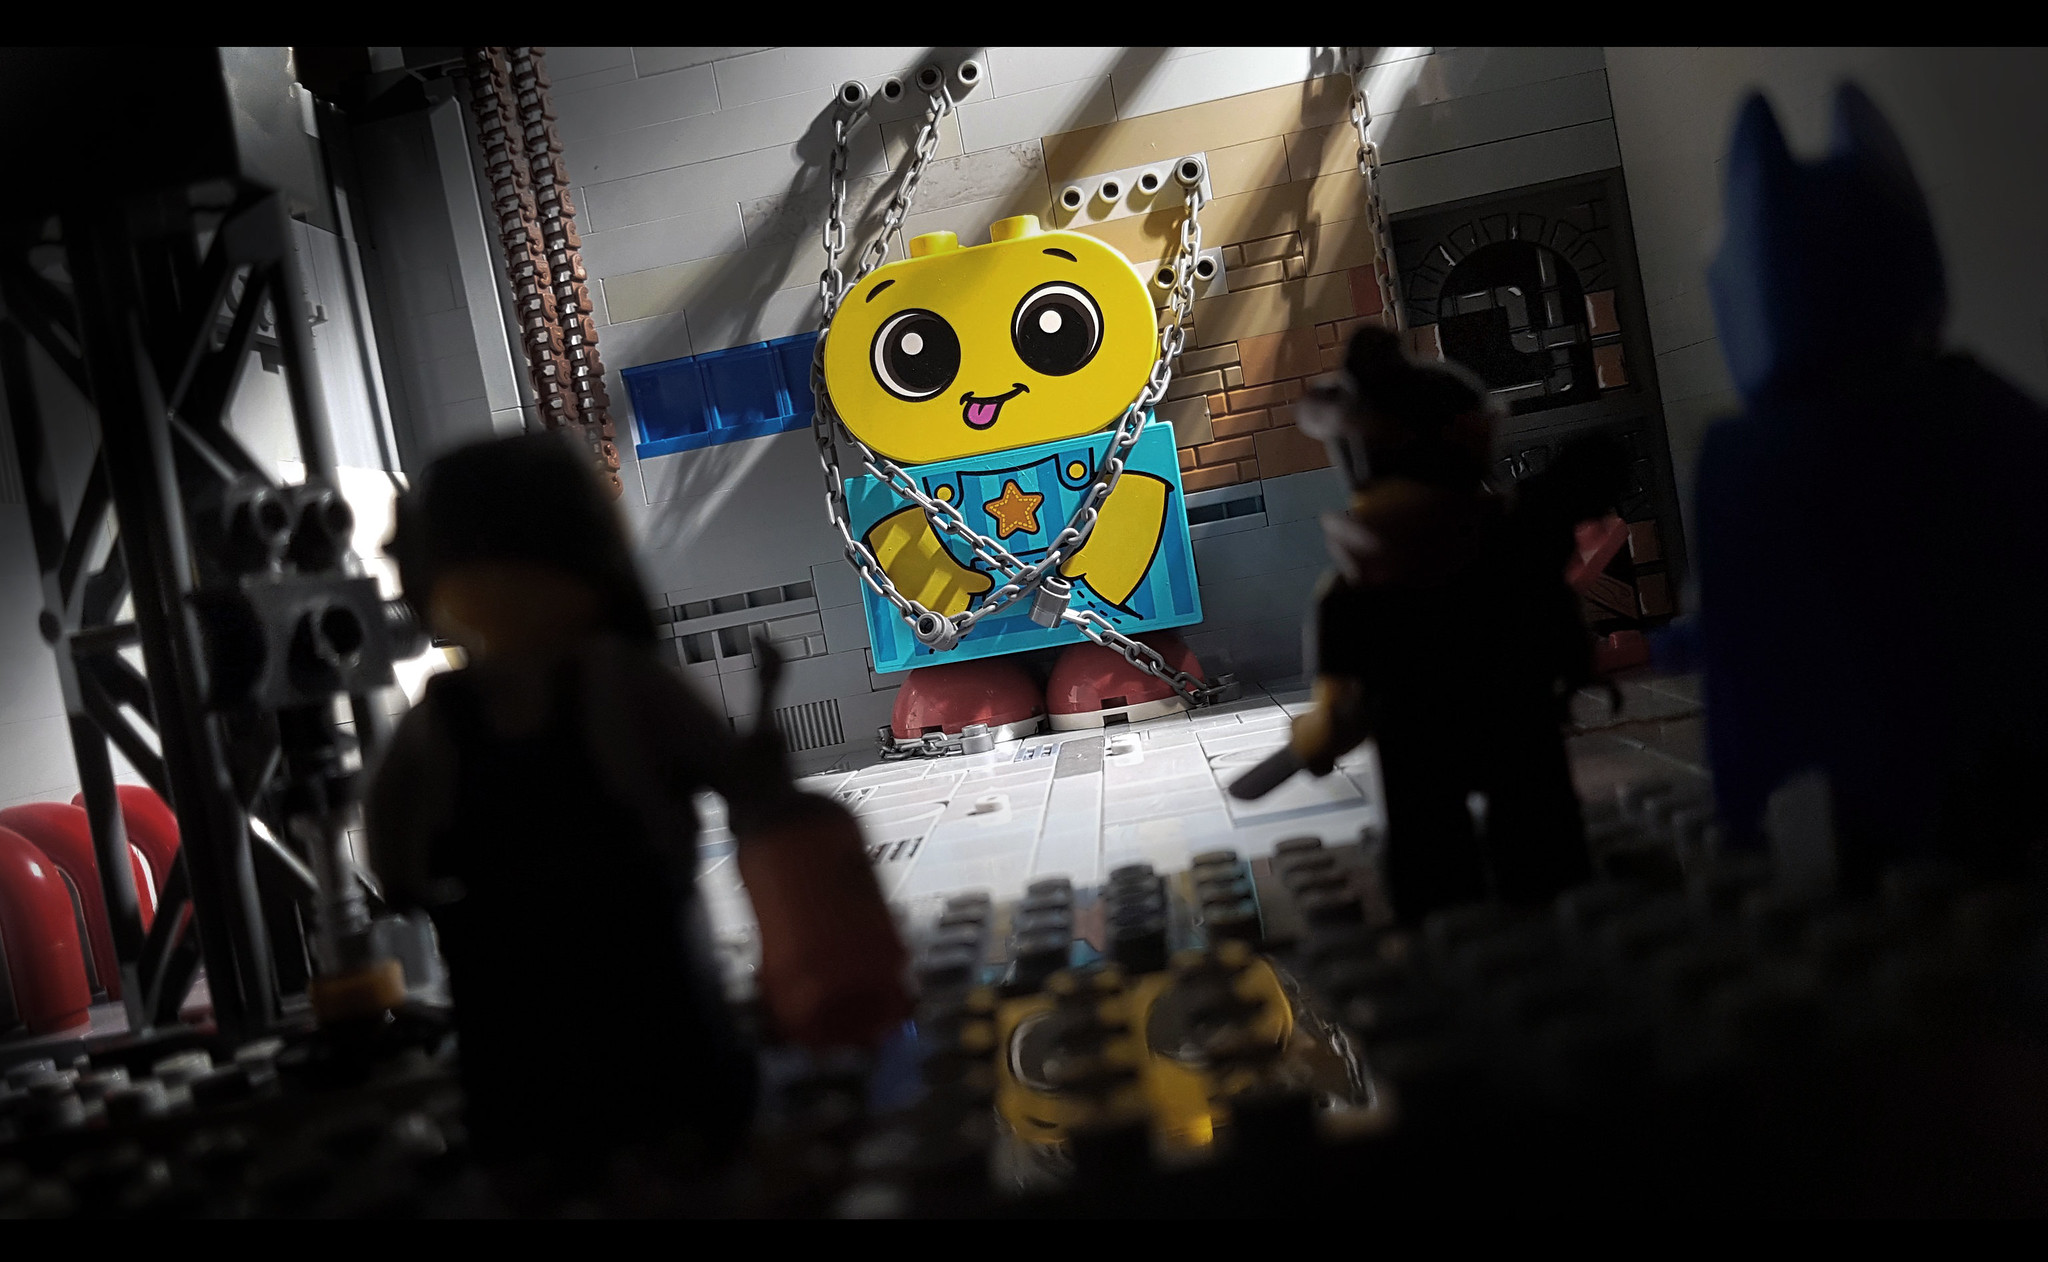 Photo of LEGO Duplo character chained to a wall with The LEGO Movie characters in foreground by Shannon Sproule